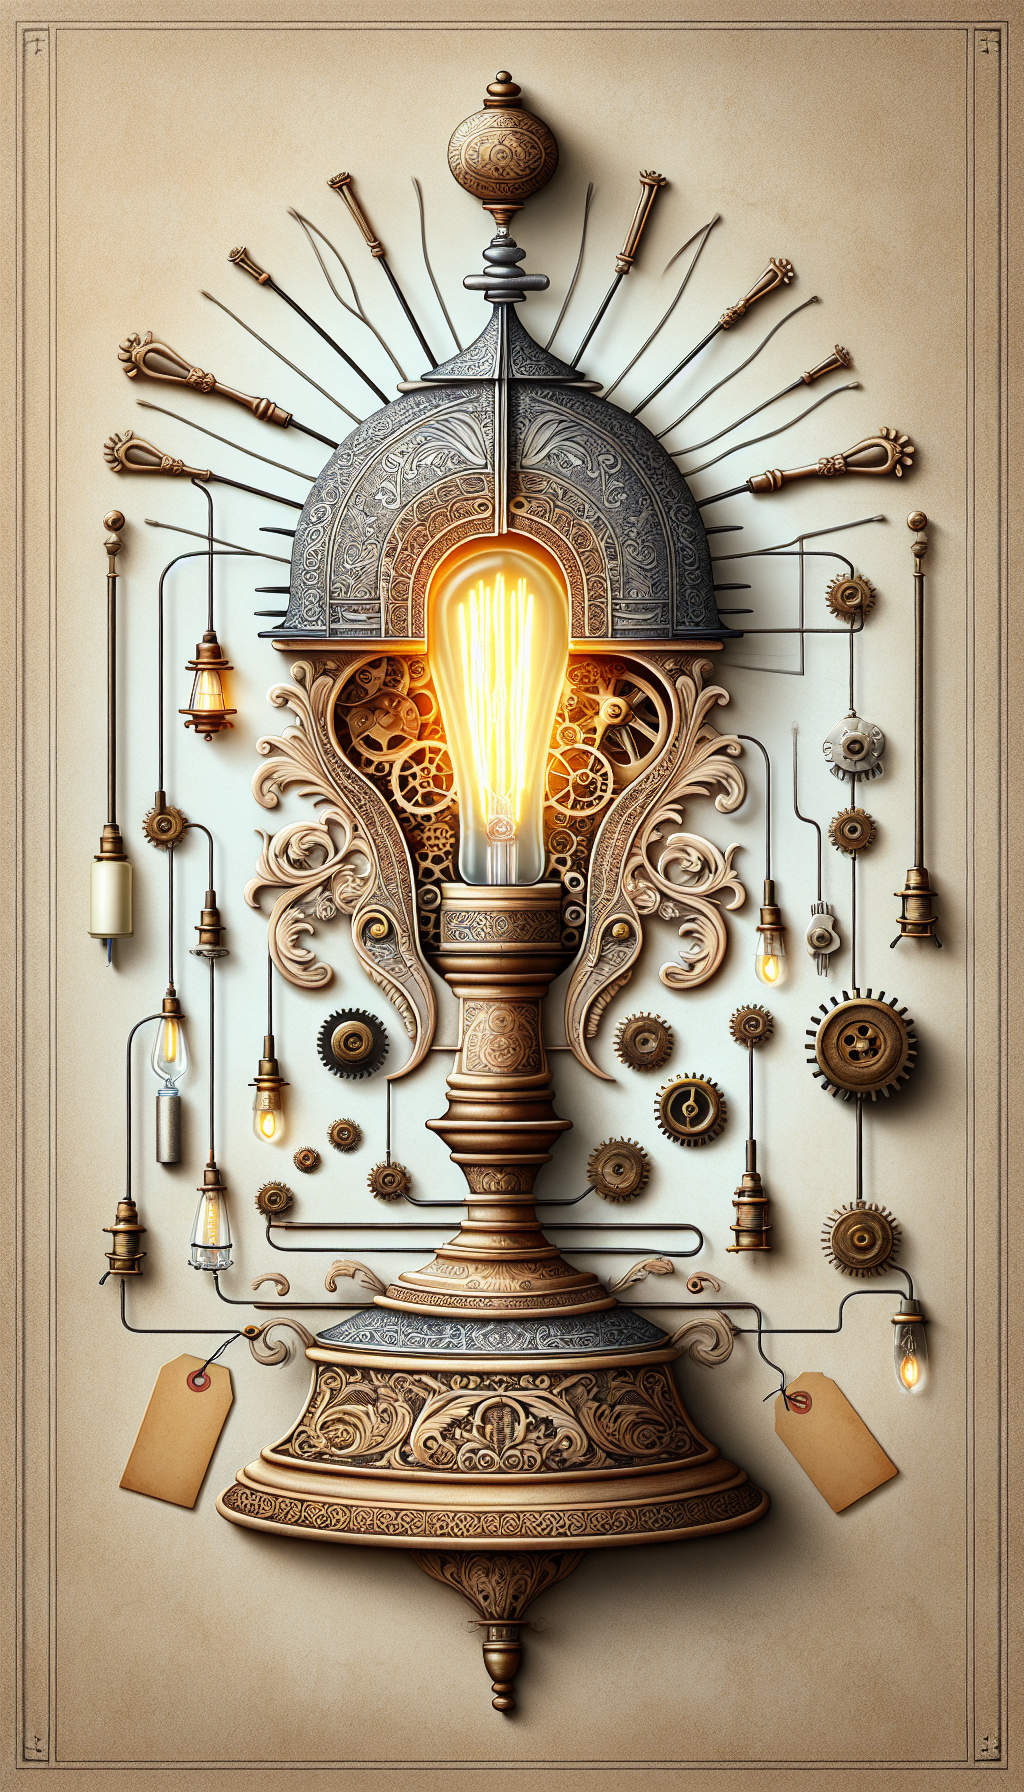 A whimsical steampunk-inspired cross-section of an antique lamp transitions from a glowing candle wick at the base to a radiant LED filament at the top, symbolizing the evolution from wicks to watts. Gears and cogs seamlessly intermingle with elegant baroque patterns to frame the lamp, while price tags dangle from each era's design element, illustrating the varying values of antique lamps through time.